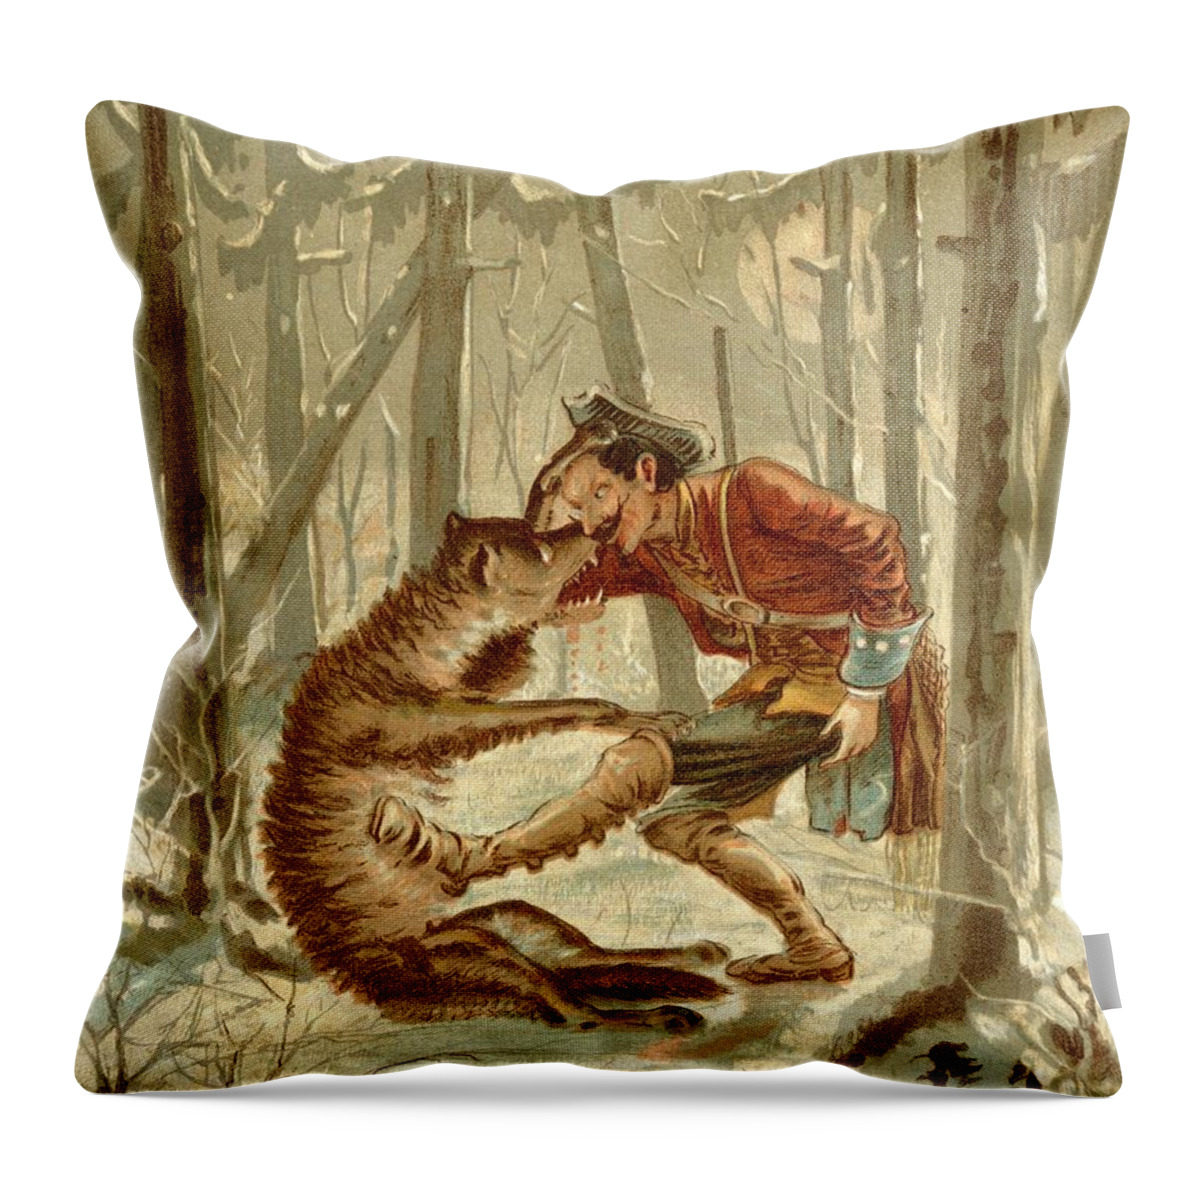 Munchausen Throw Pillow featuring the drawing Baron Munchausens Encounter With A Wolf by Vintage Design Pics